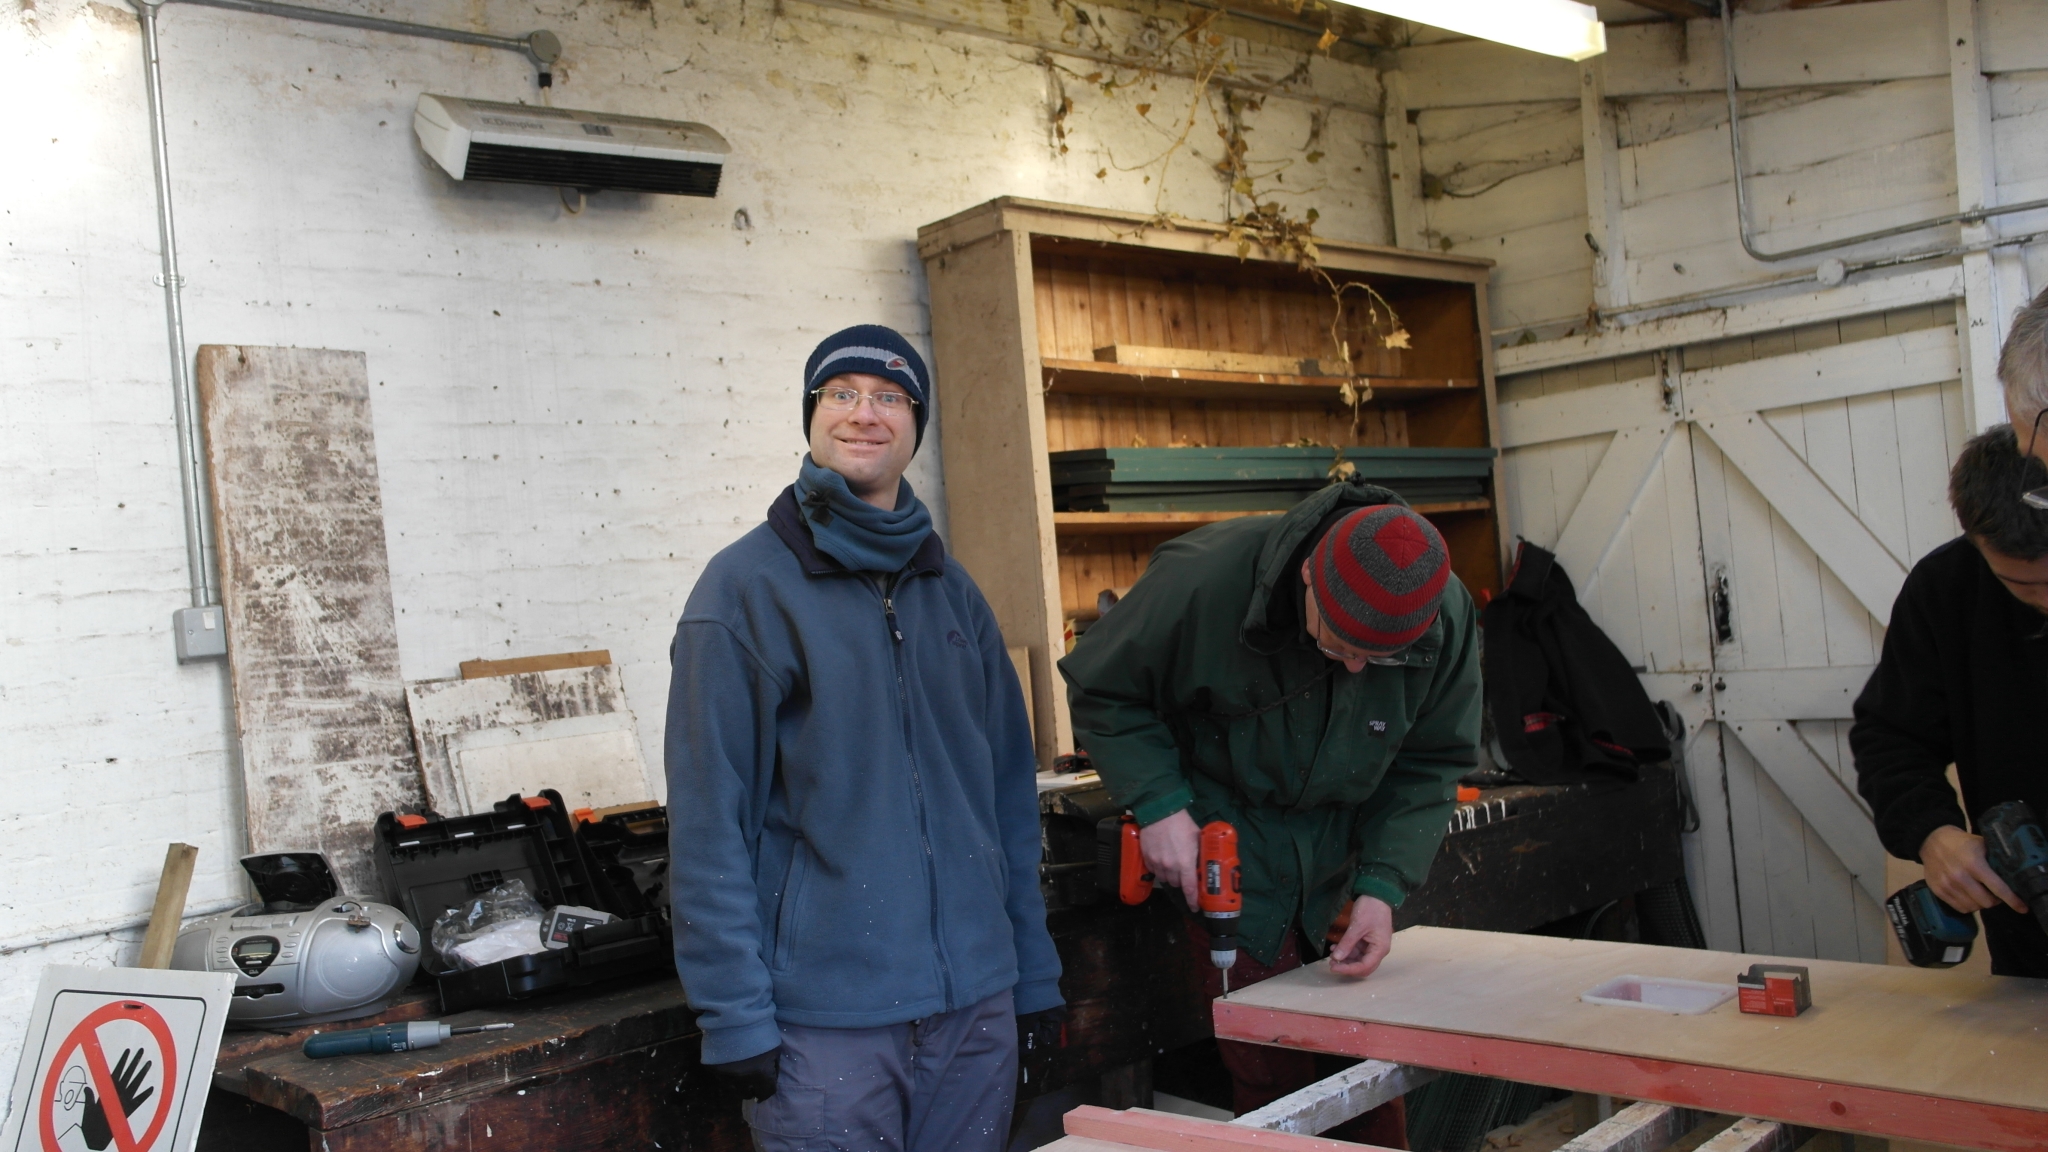 A photo from the FoTF Conservation Event - December 2018 - Constructing Mink Rafts at Santon Downham Workshops : The team at work on the Mink Rafts